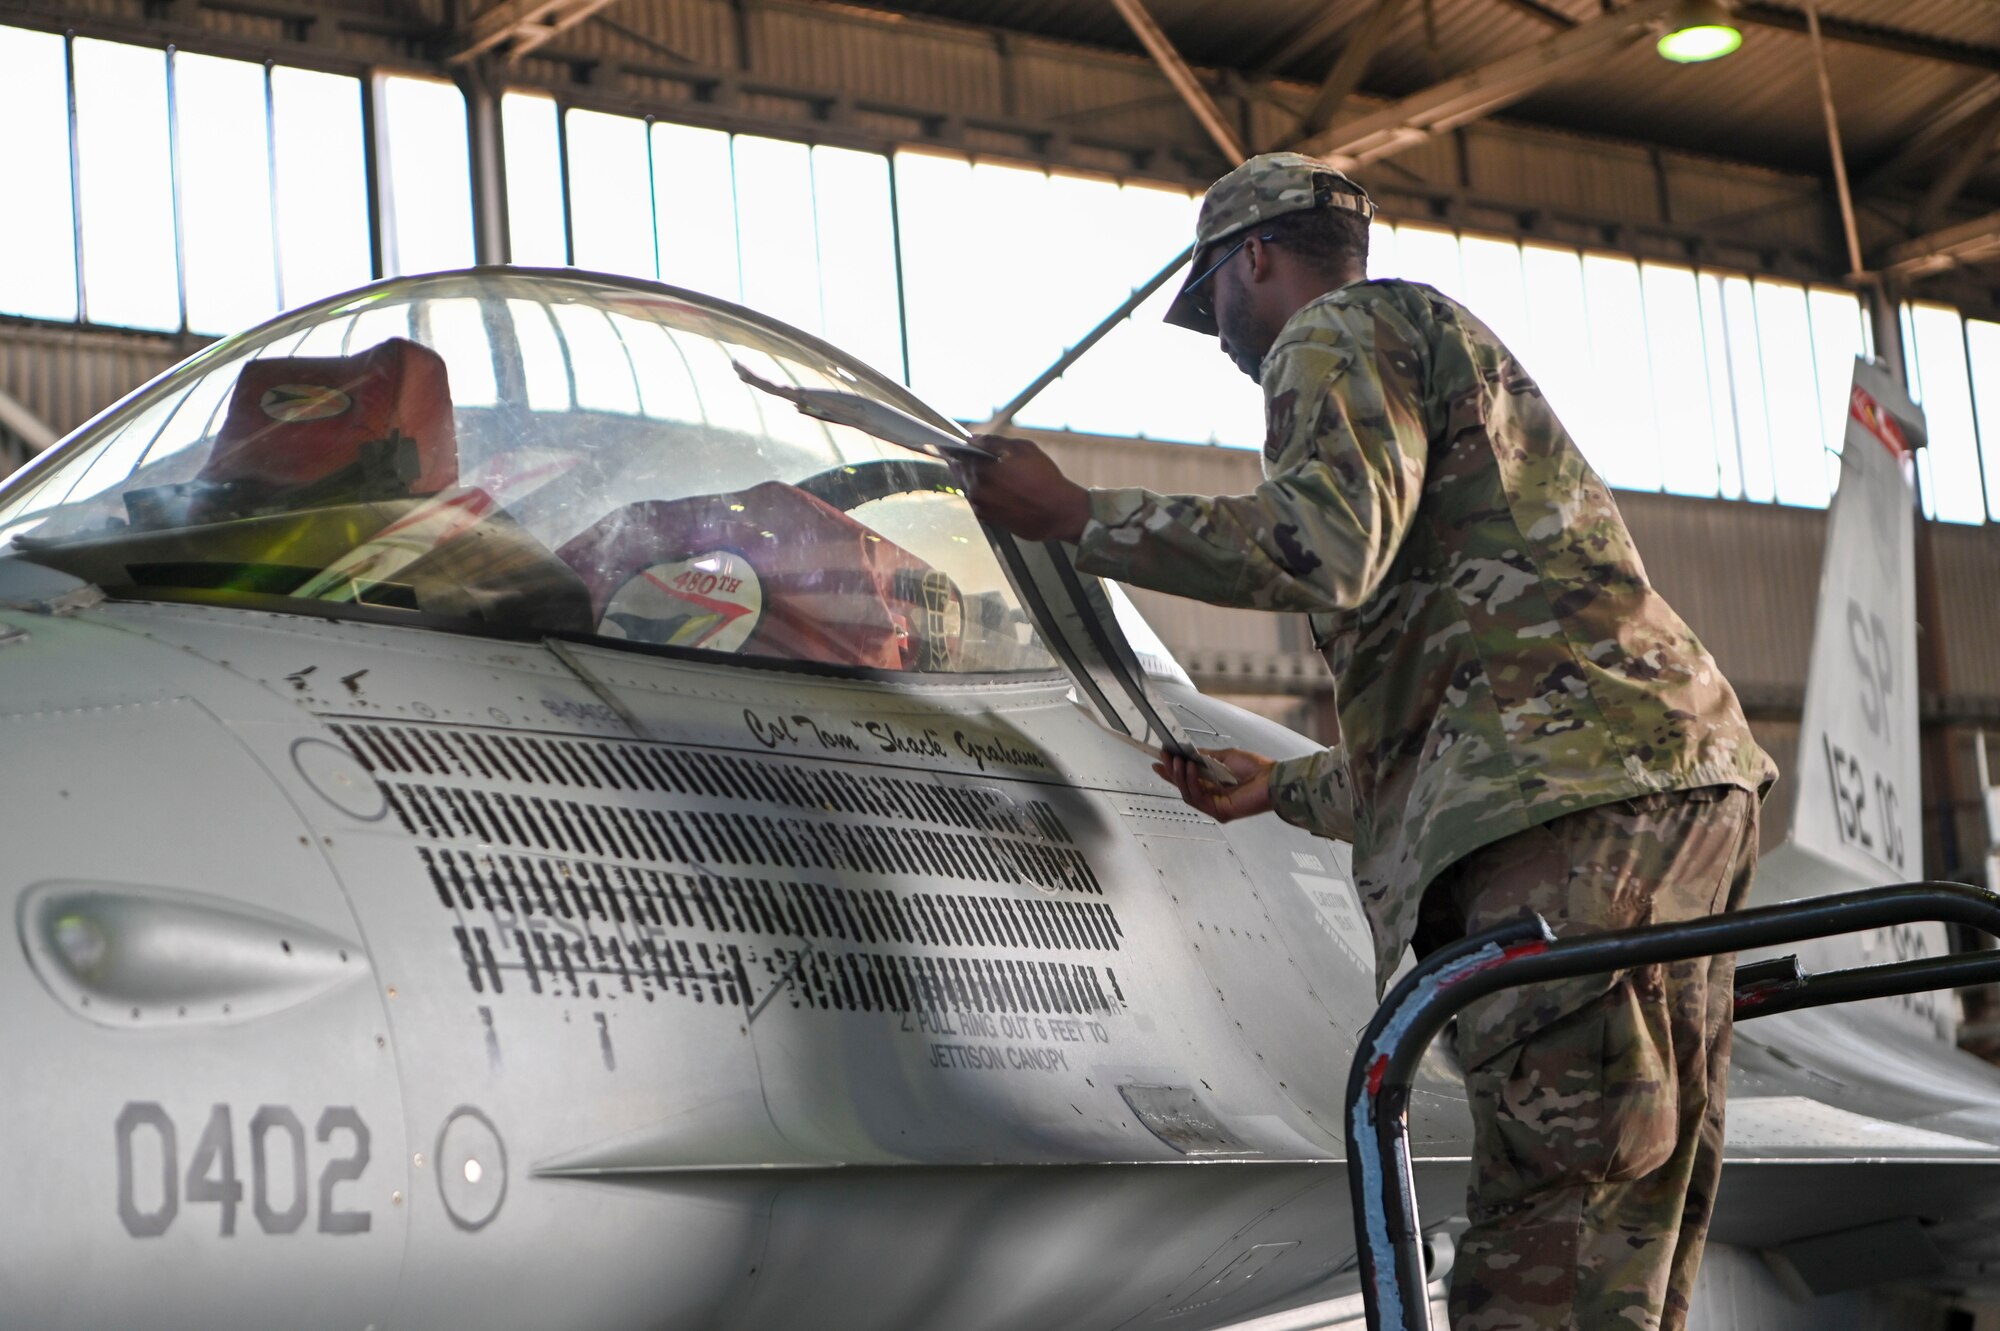 Staff Sgt. John Reid, 52nd Aircraft Maintenance Squadron crew chief, unveils the name of Col. Thomas Graham, 52nd Operations Group commander, on the 52nd OG F-16 Viper flagship, during an assumption of command ceremony, June 28, 2022, on Spangdahlem Air Base, Germany. It is an Air Force tradition to rename a commander’s flagship and have their name painted on the aircraft, depicting it as the group commander’s. (U.S. Air Force photo by Senior Airman Jessica Sanchez-Chen)